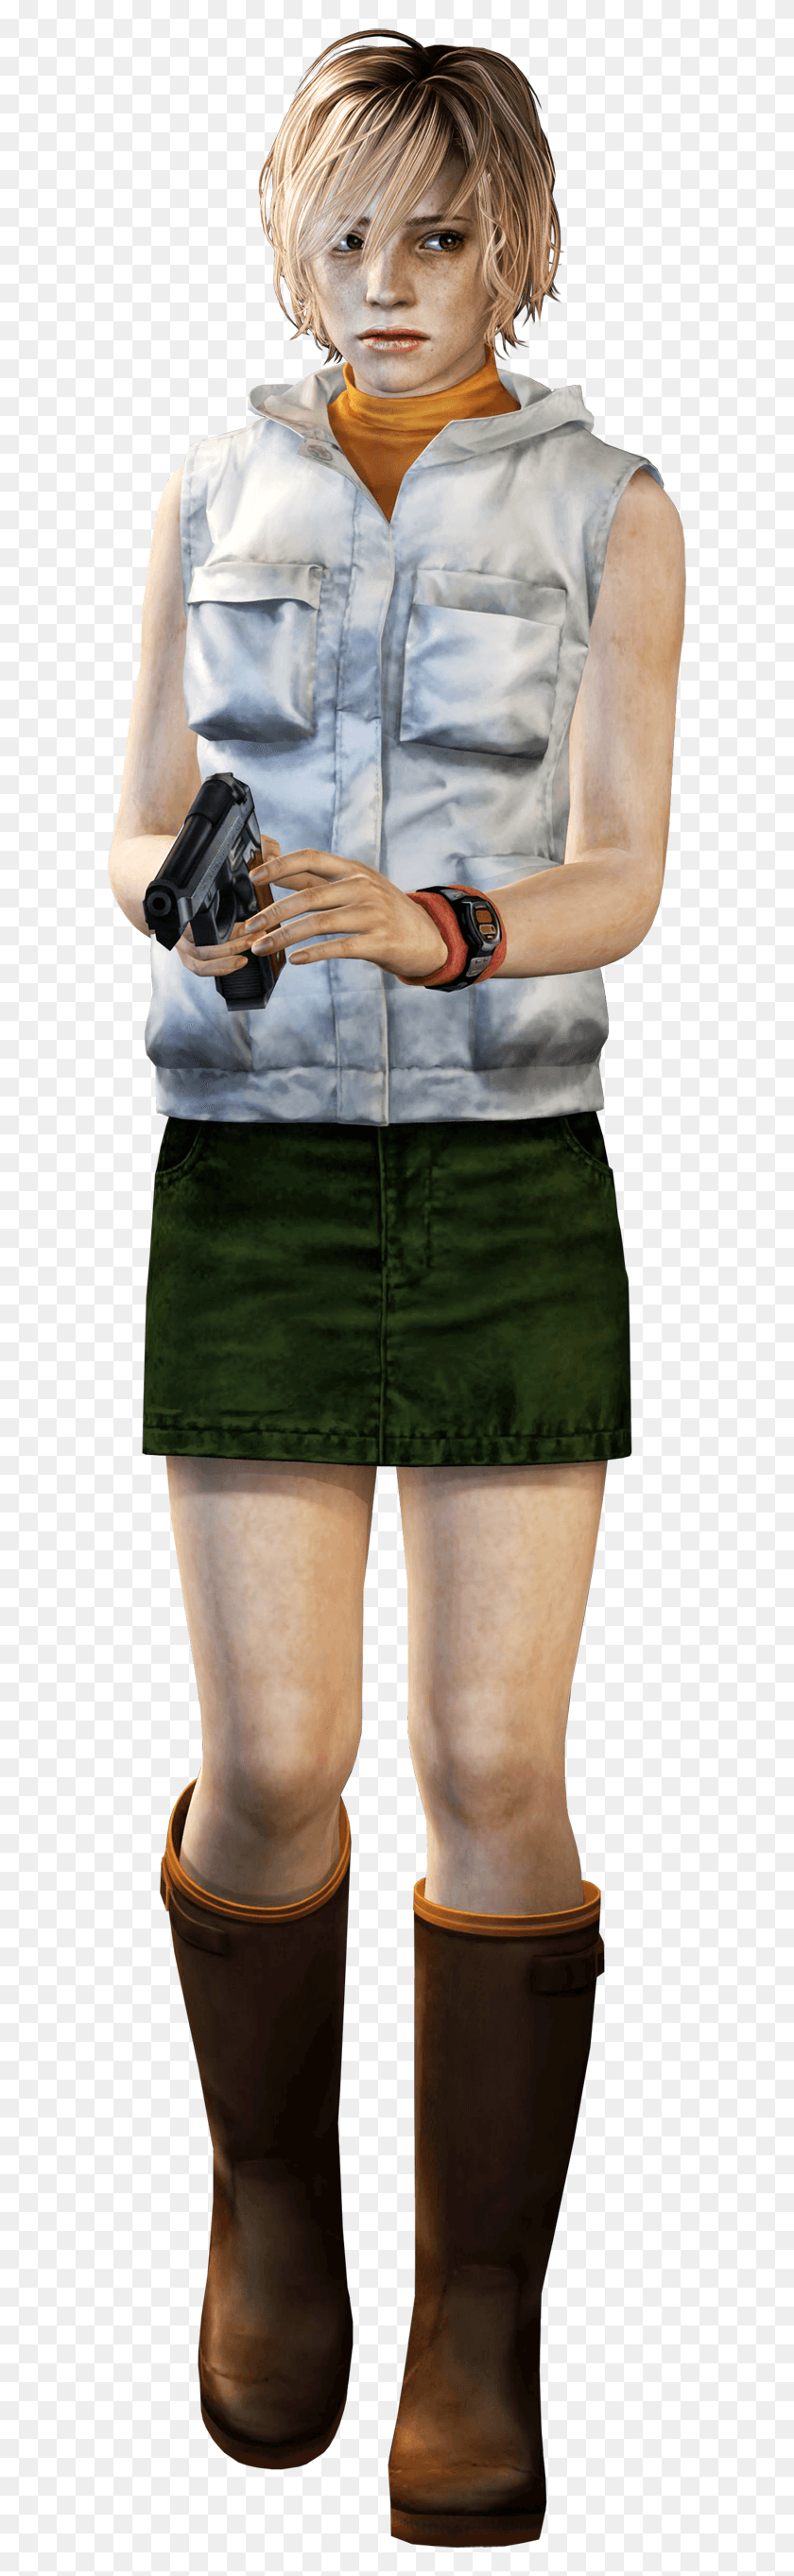 613x2665 Descargar Png / Silent Hill 3, Heather, Ropa, Persona Hd Png